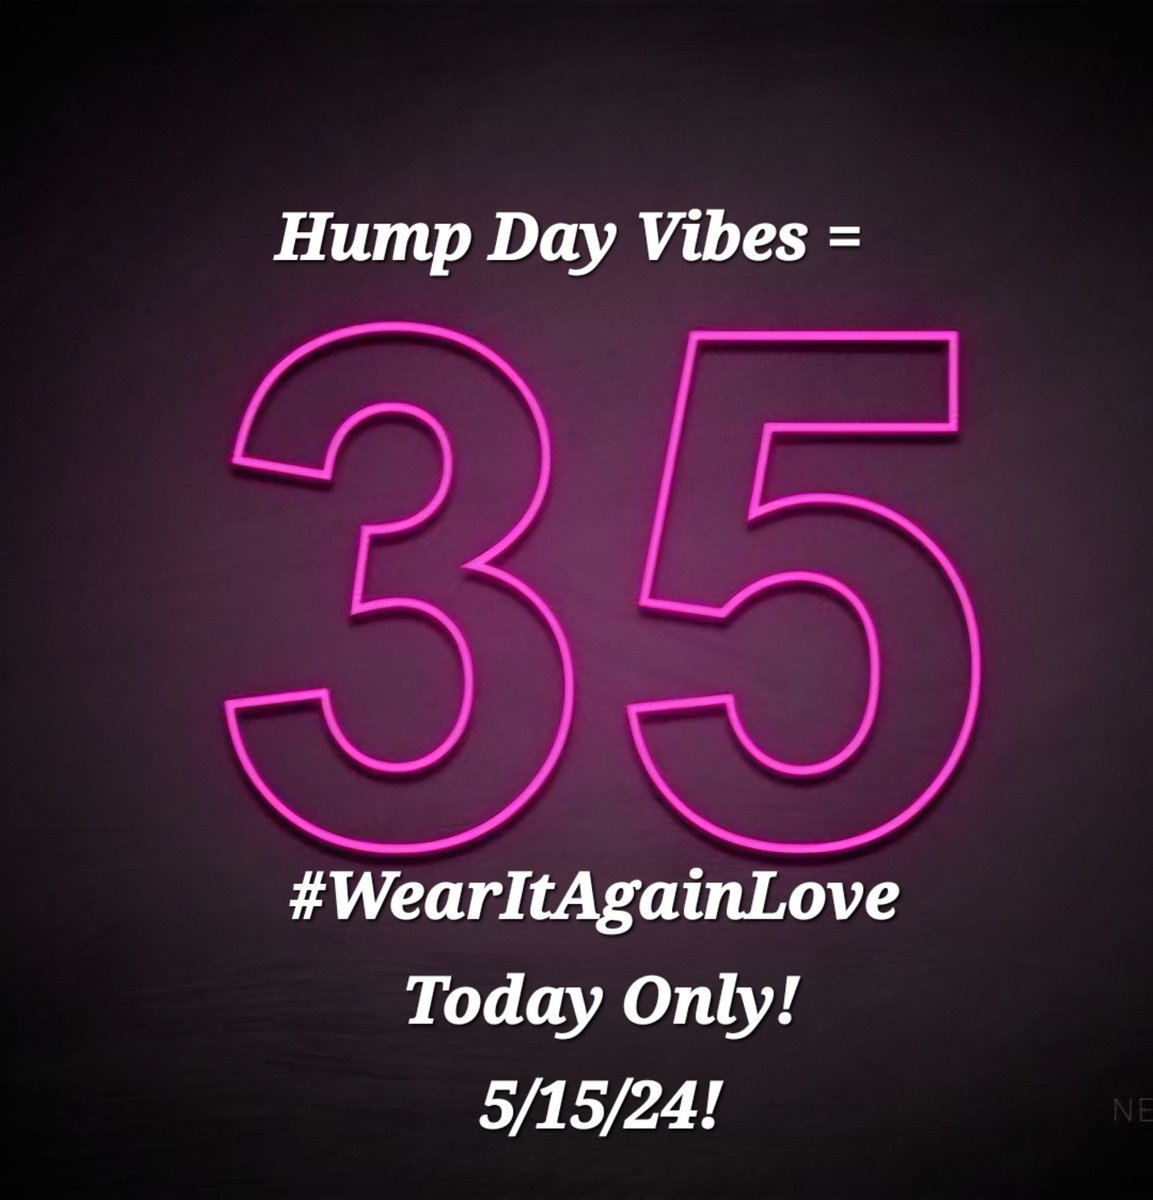 #humpdaywednesday #vibes = 35% OFF! TODAY ONLY! 
#WearItAgainLove #fashion #namebrandsforless #handbags #retail #jewelrydesign #statementjewelry #fashionblogger #fashiontrends  #styleblogger #clothing #accessories #fashionable #etsyshop #designer
wearitagainlove.etsy.com